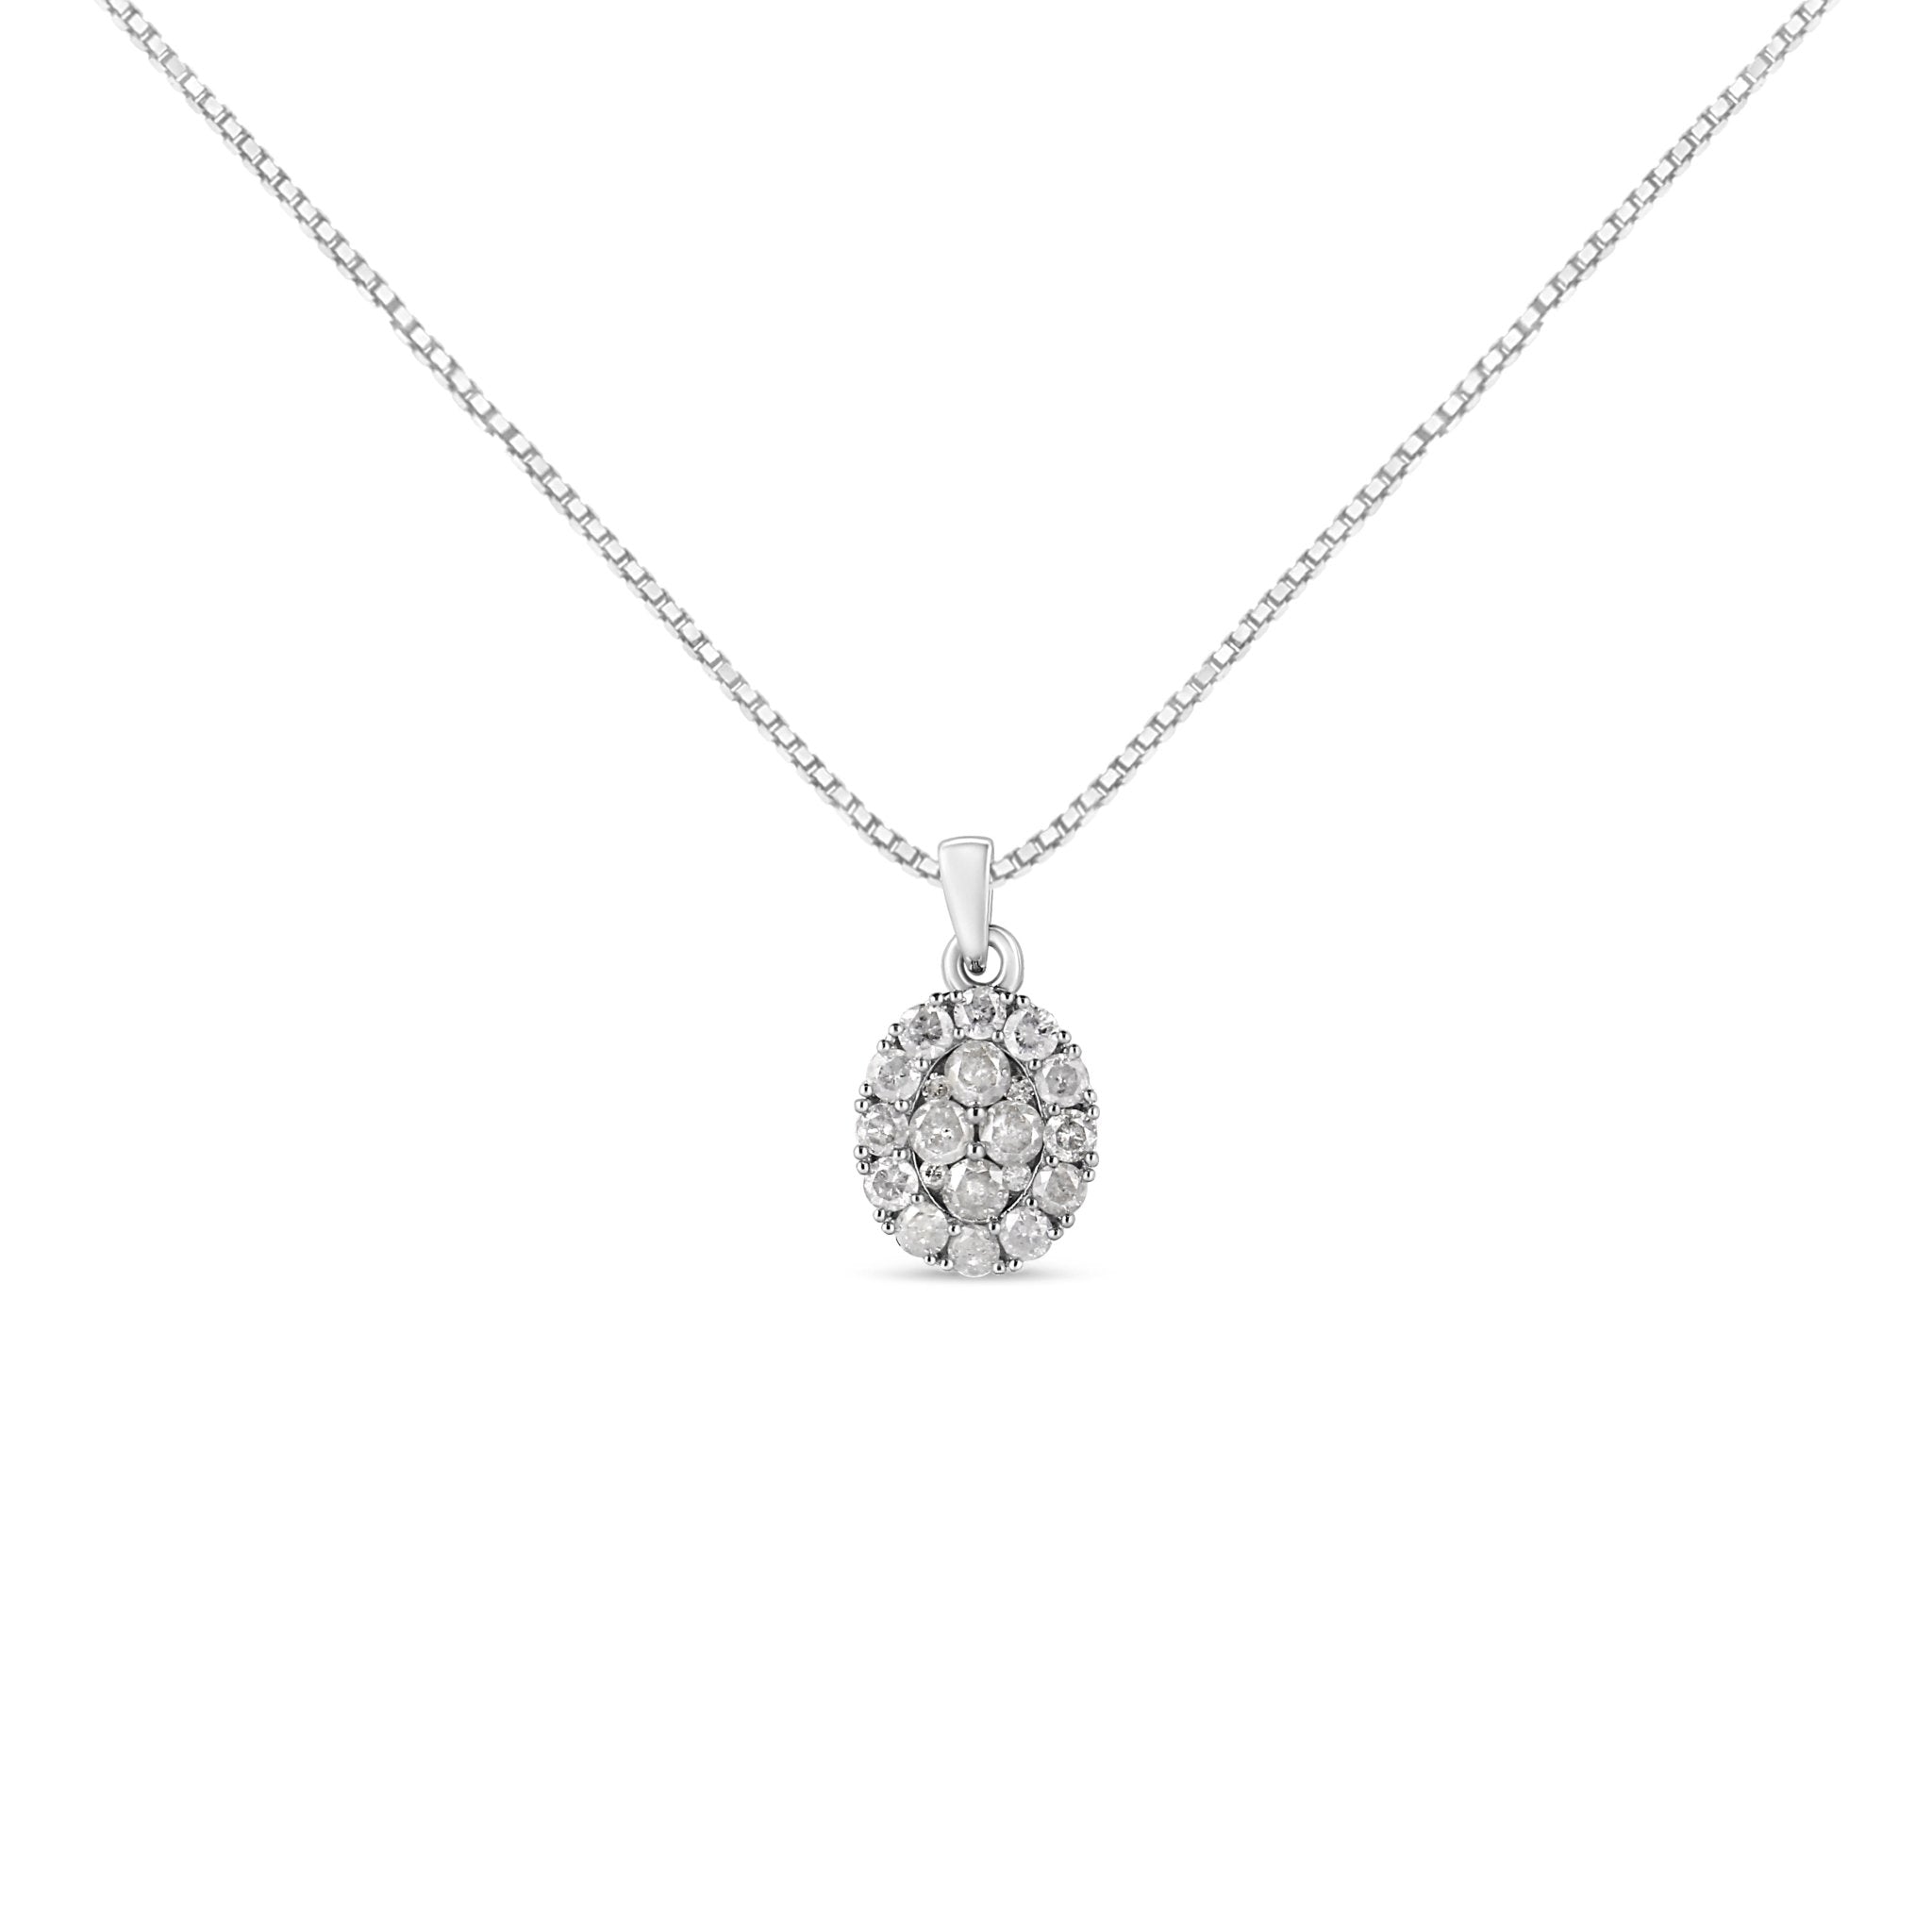 .925 Sterling Silver 1 1/2 Cttw Diamond Oval Cluster Pendant Necklace (I-J Color, I2-I3 Clarity) - 18